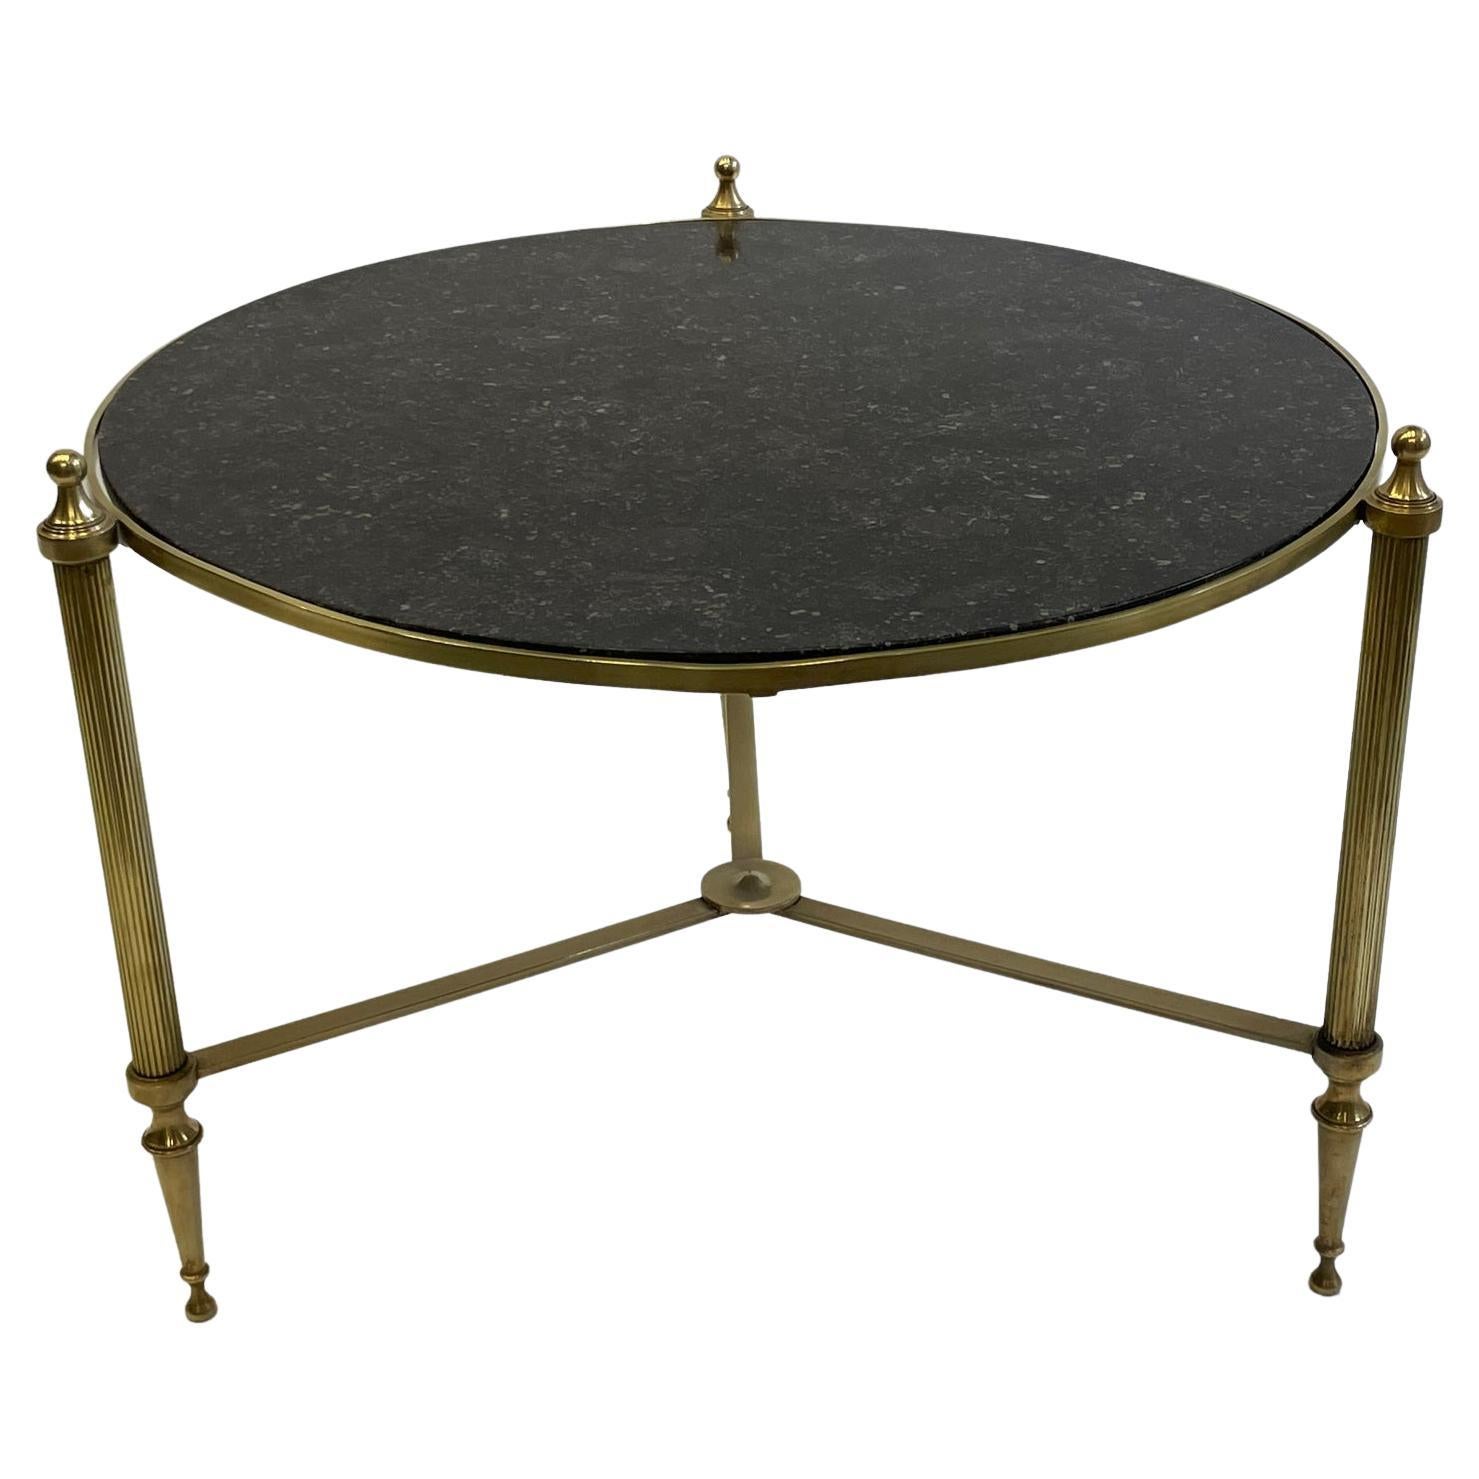 Sophisticated Round Maison Jansen Style Brass Coffee Table with Black Marble Top